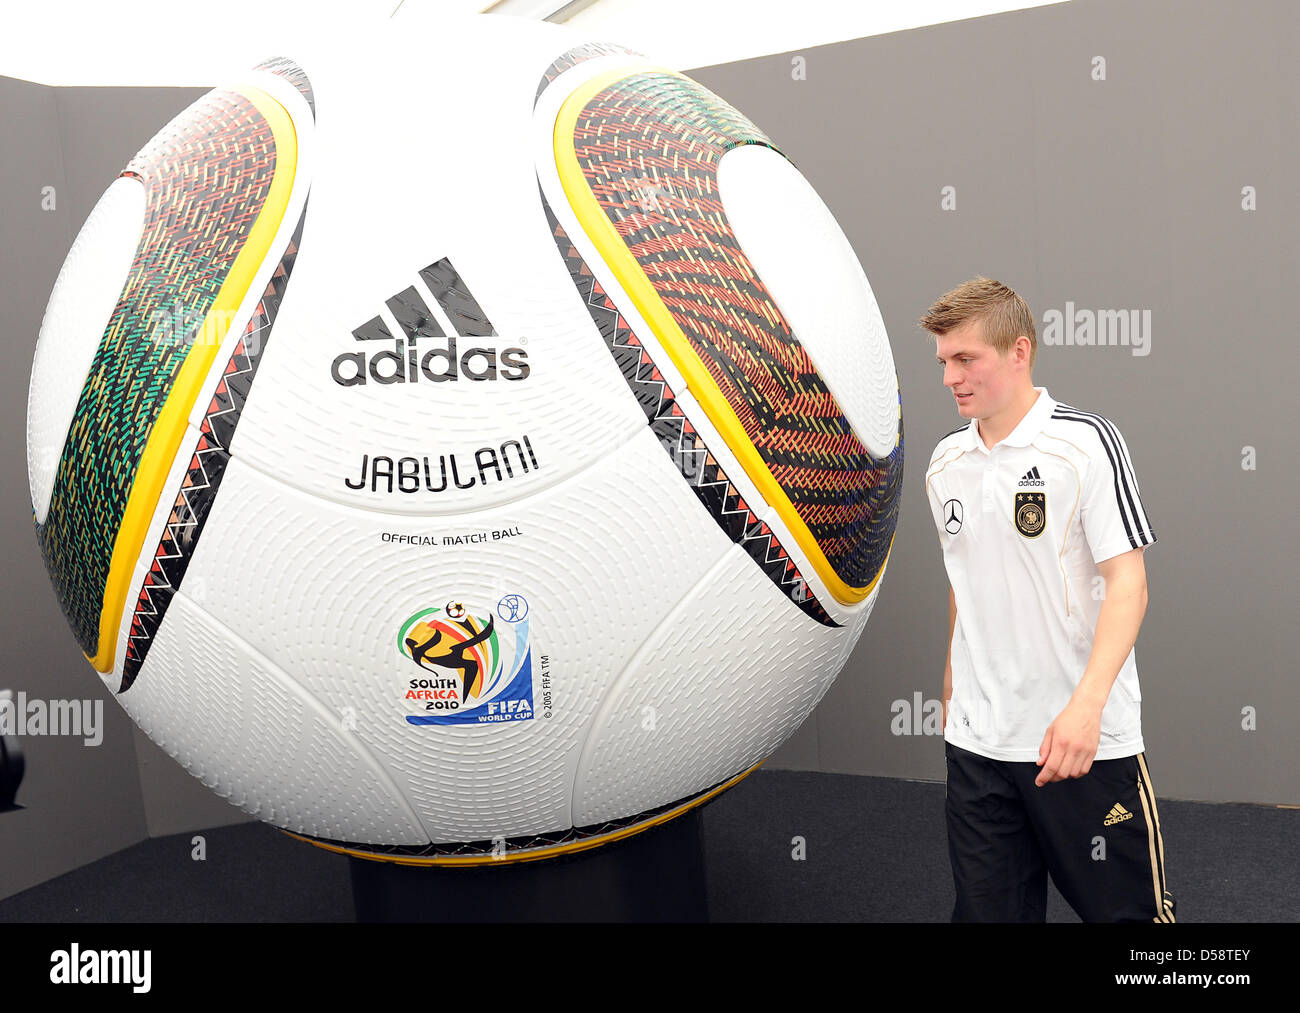 German international Toni Kroos passes a huge World Cup ball after a press  conference of the German Football Association (DFB) in Eppan, Italy, 23 May  2010. The German national team prepares for